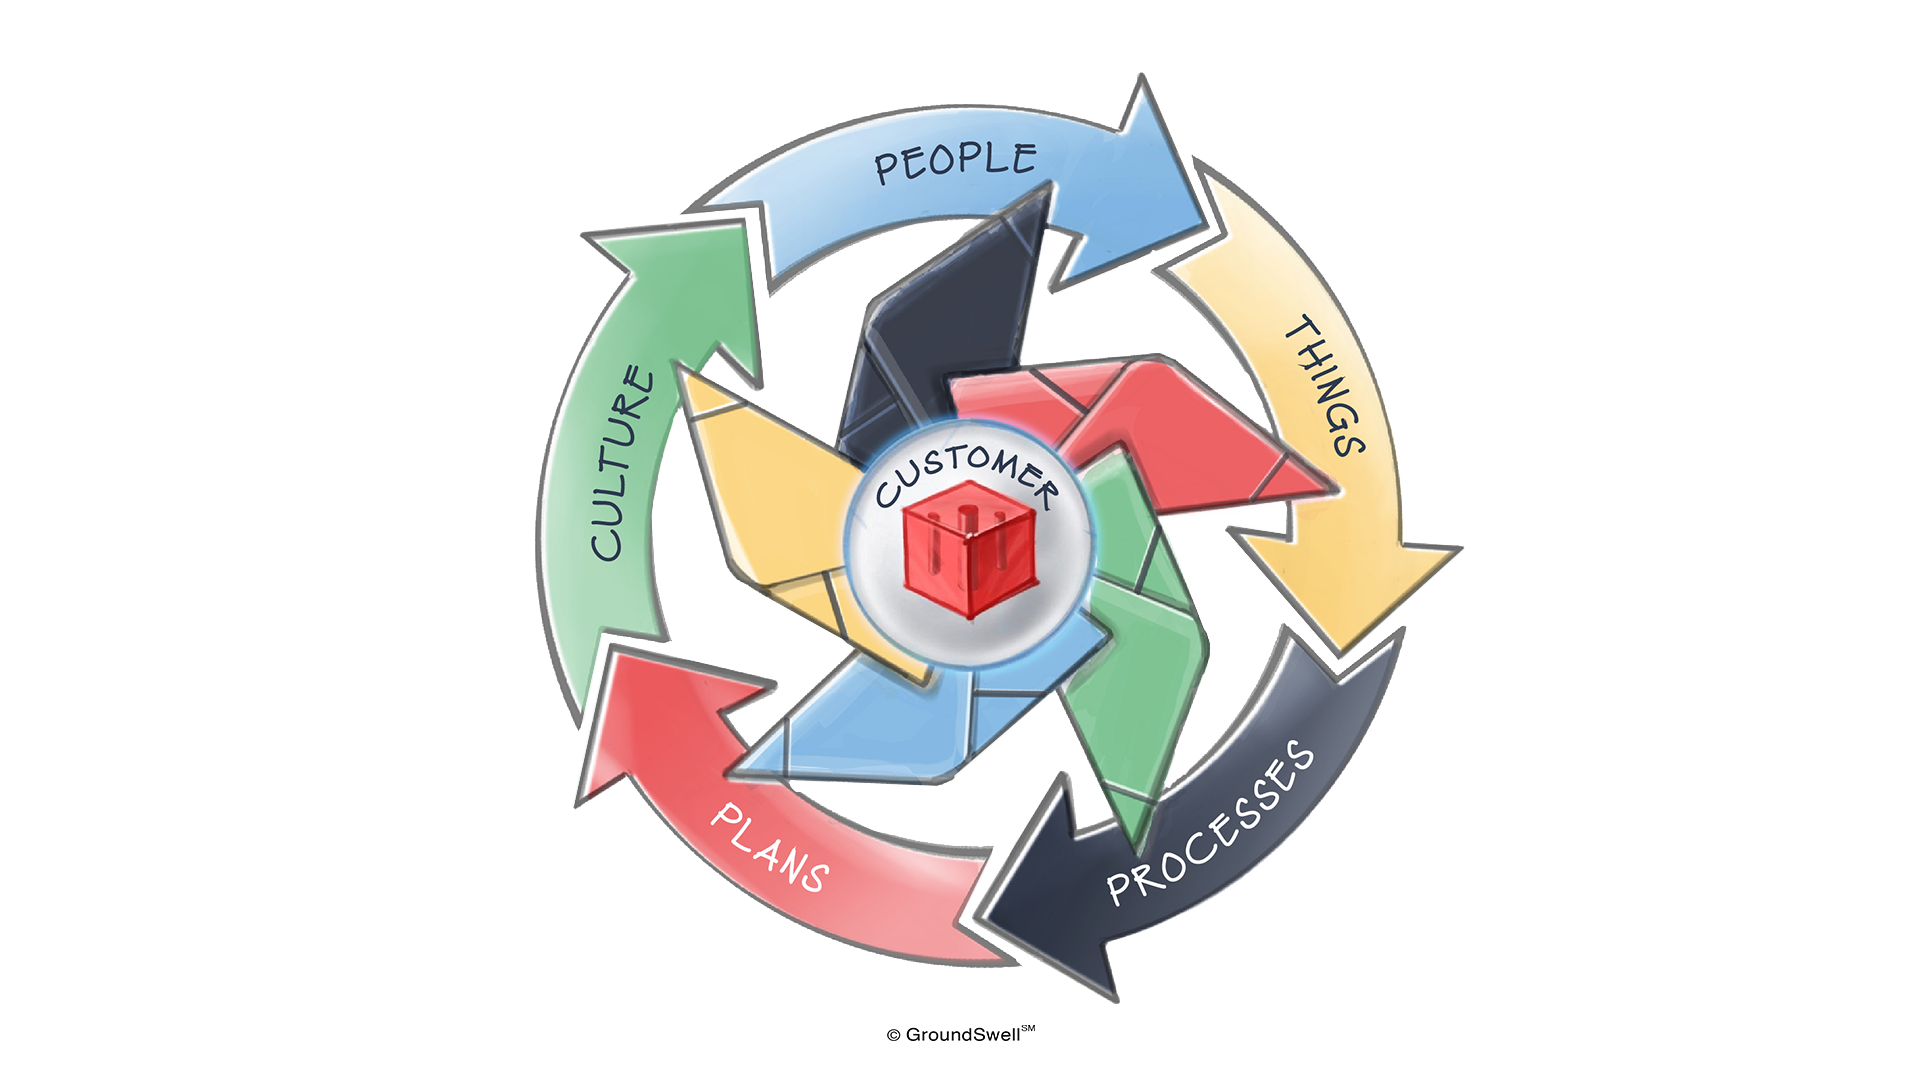 An illustration of a organizational development flywheel with a fractal inside of it along with a red cube in the center that highlights six key factors or “building blocks” that predict financial success across all sizes and types of organizations